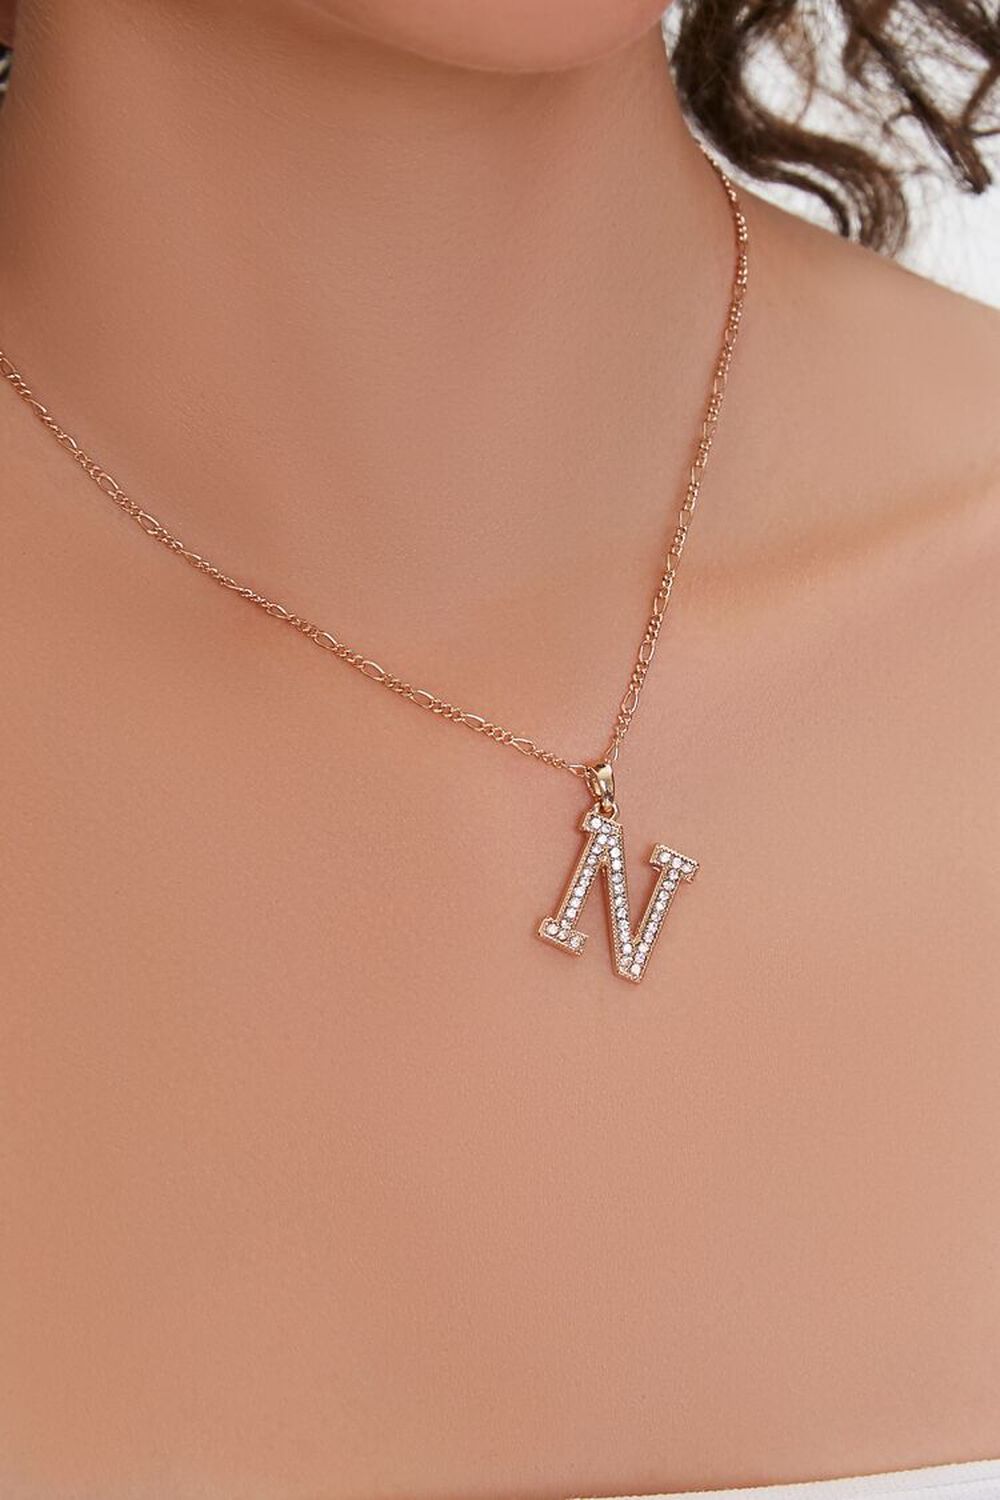 GOLD/N Initial Pendant Necklace, image 1